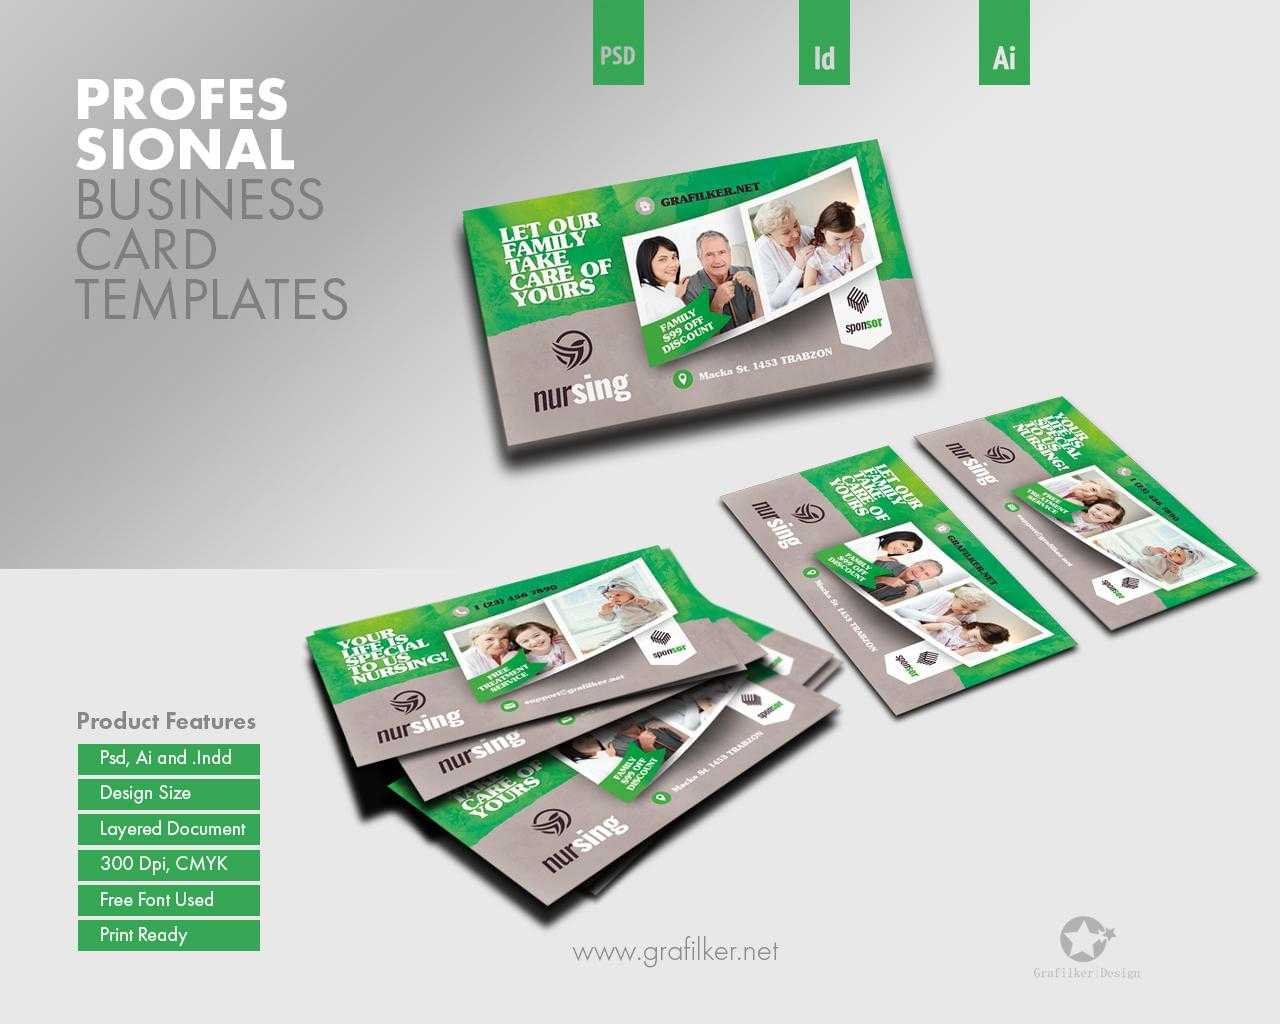 Professional Business Card Templatesgrafilker On Envato Pertaining To Advertising Cards Templates